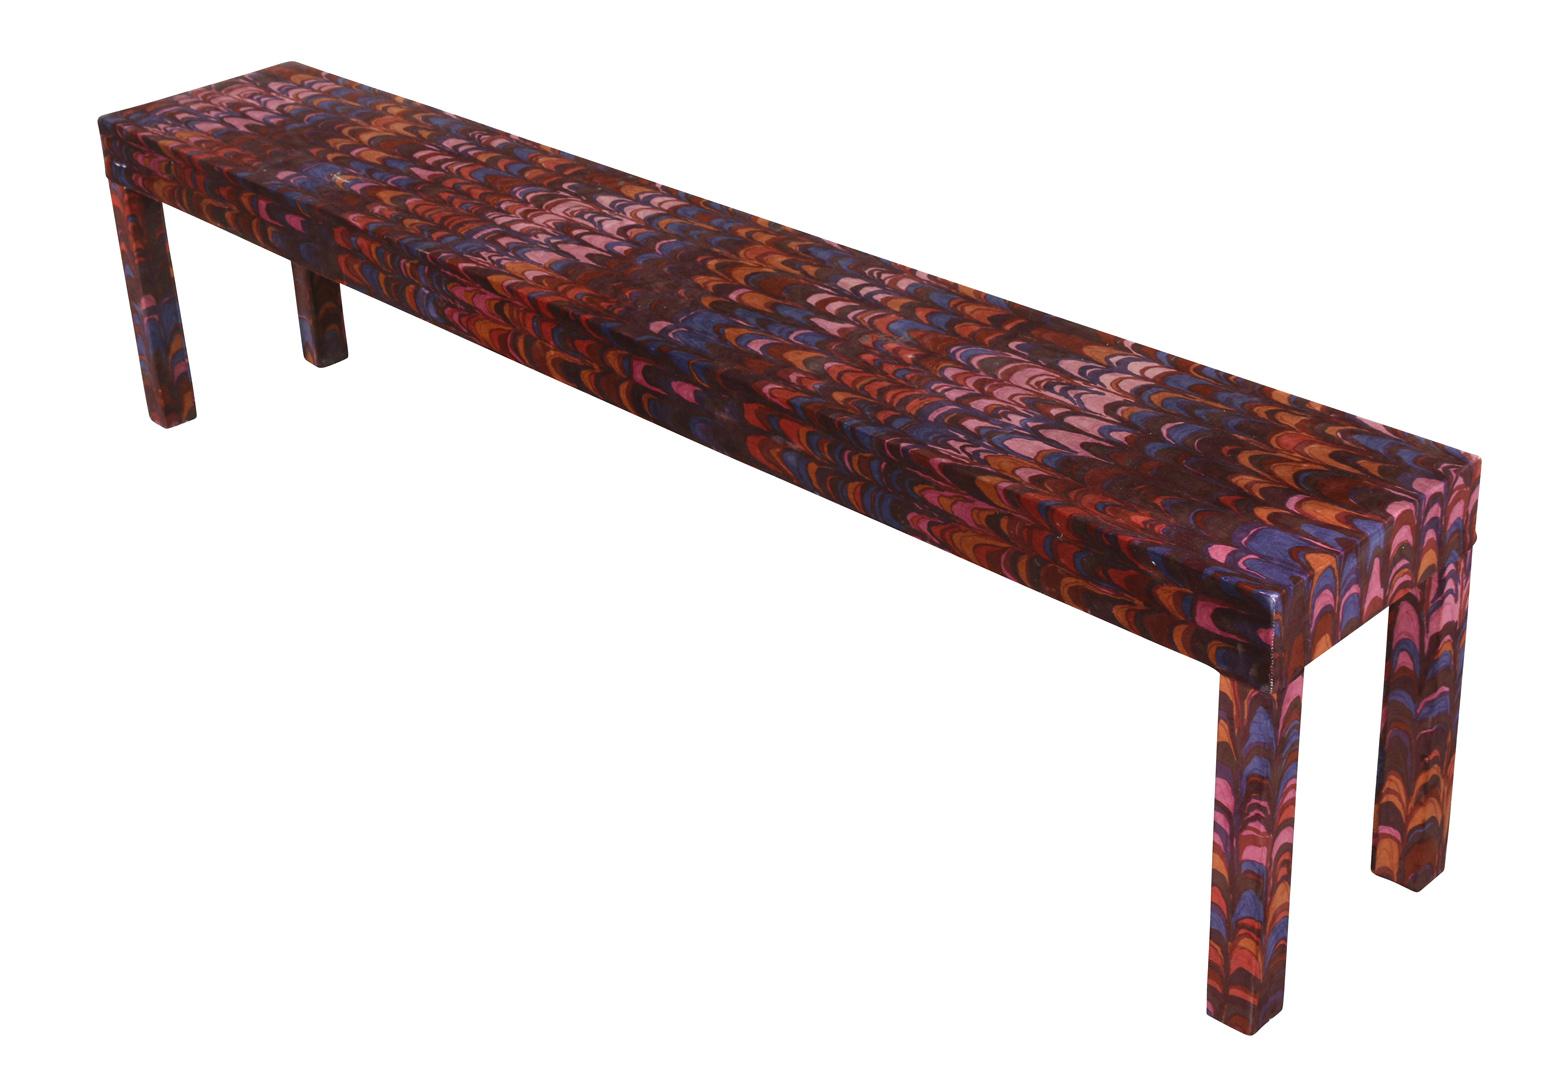 A pair of Mid-Century Modern vintage Parsons style benches in colorful abstract velvet.